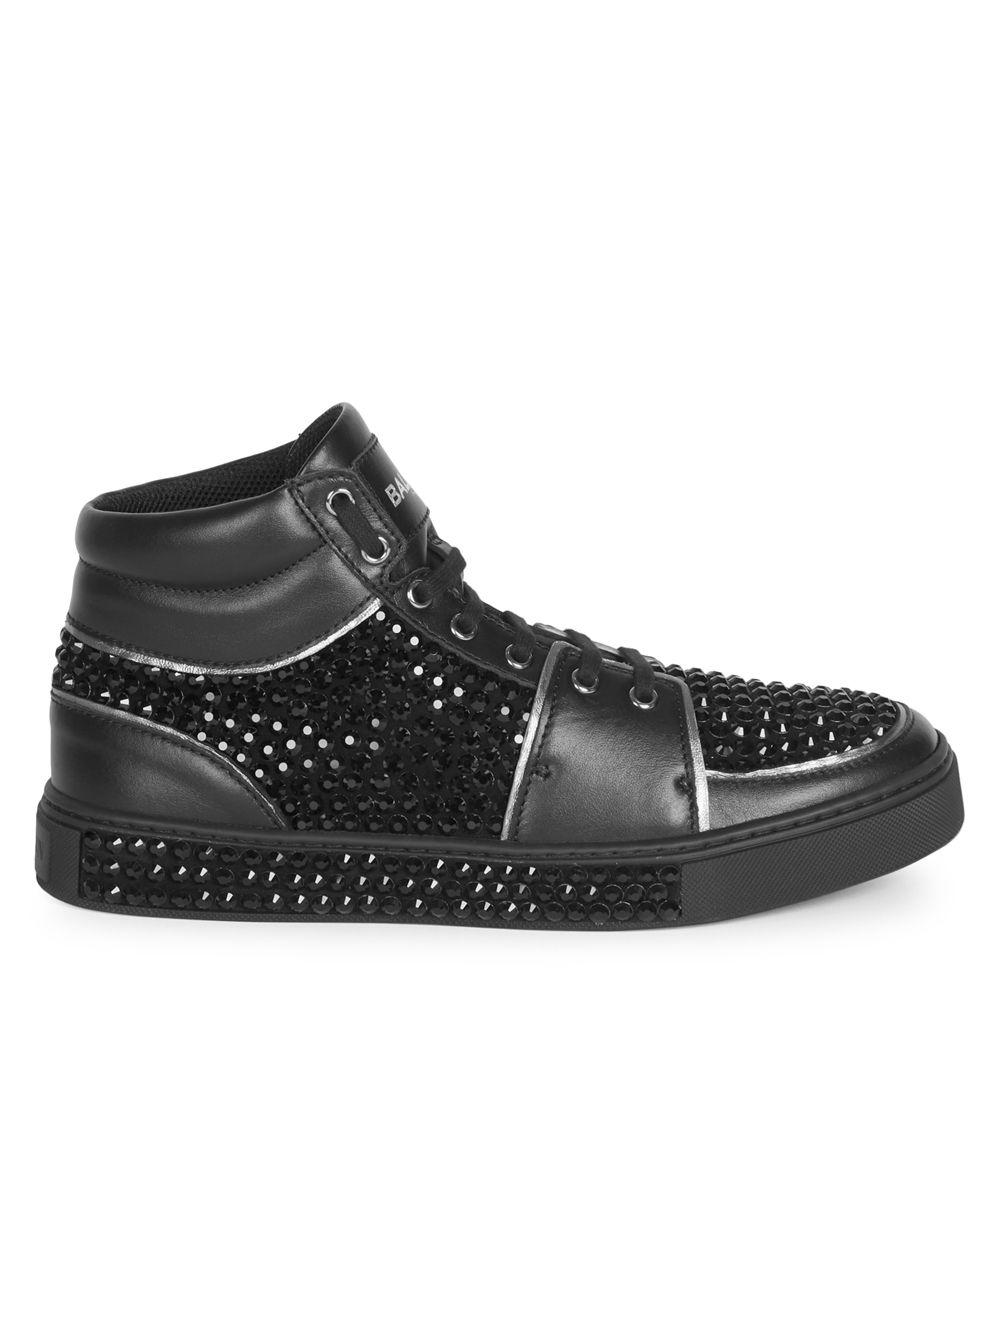 Balmain Studded Leather High-top Sneakers in Black for Men - Lyst